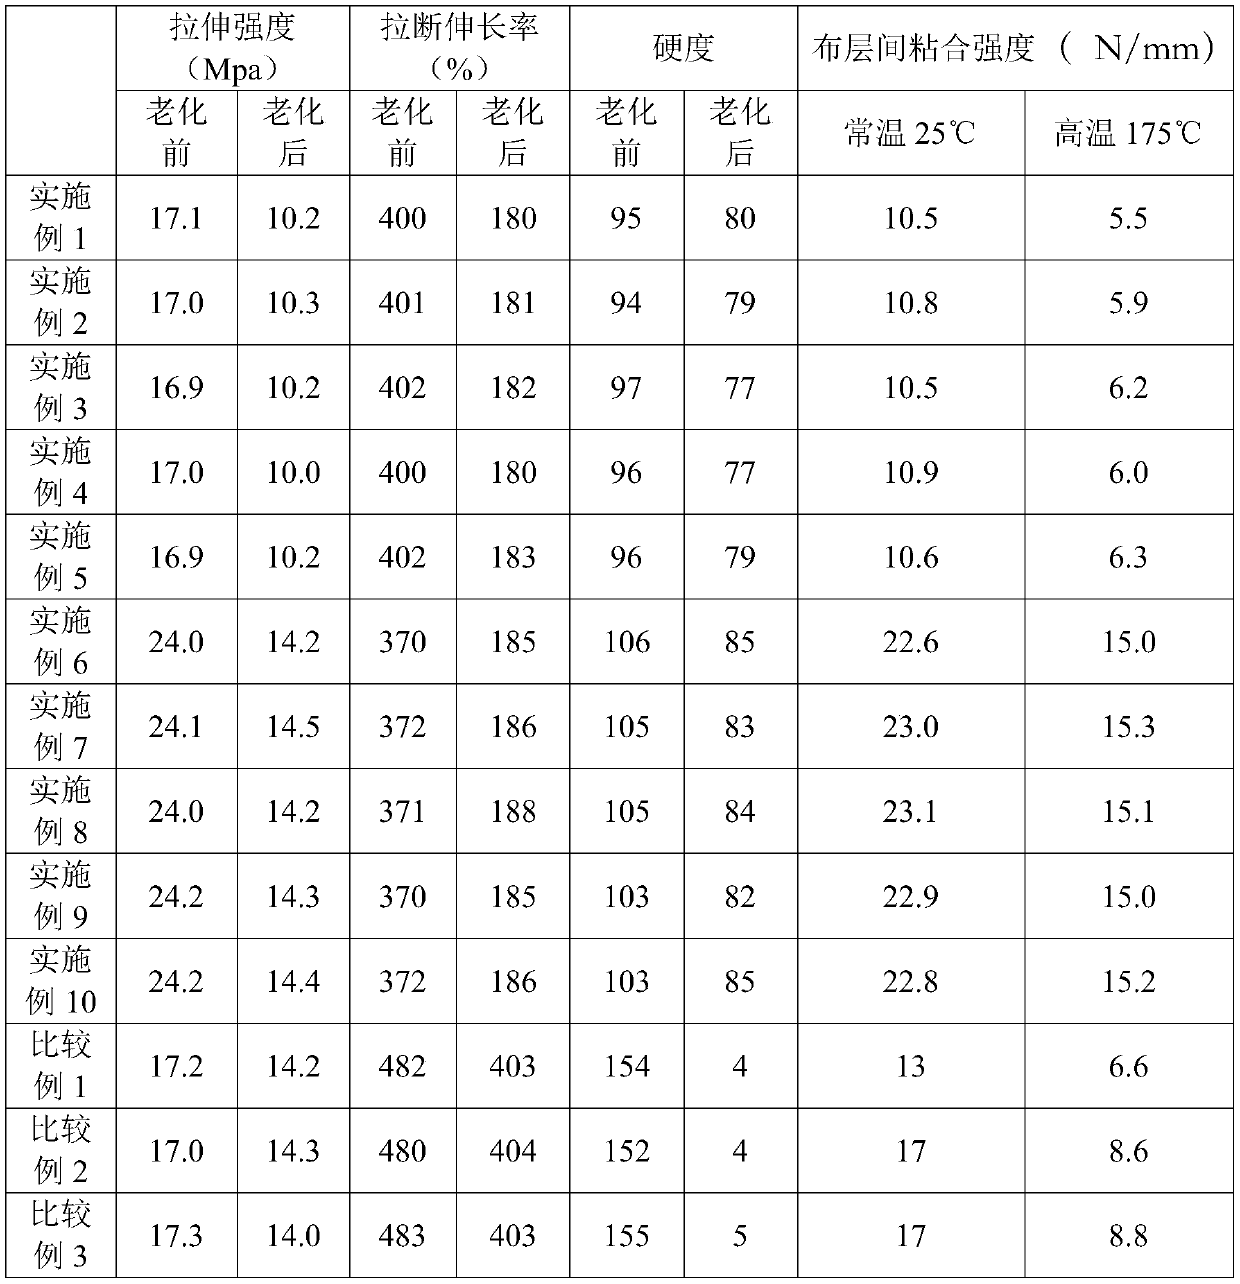 High-temperature-resistant conveyor belt cover rubber for cement plant and preparation process thereof